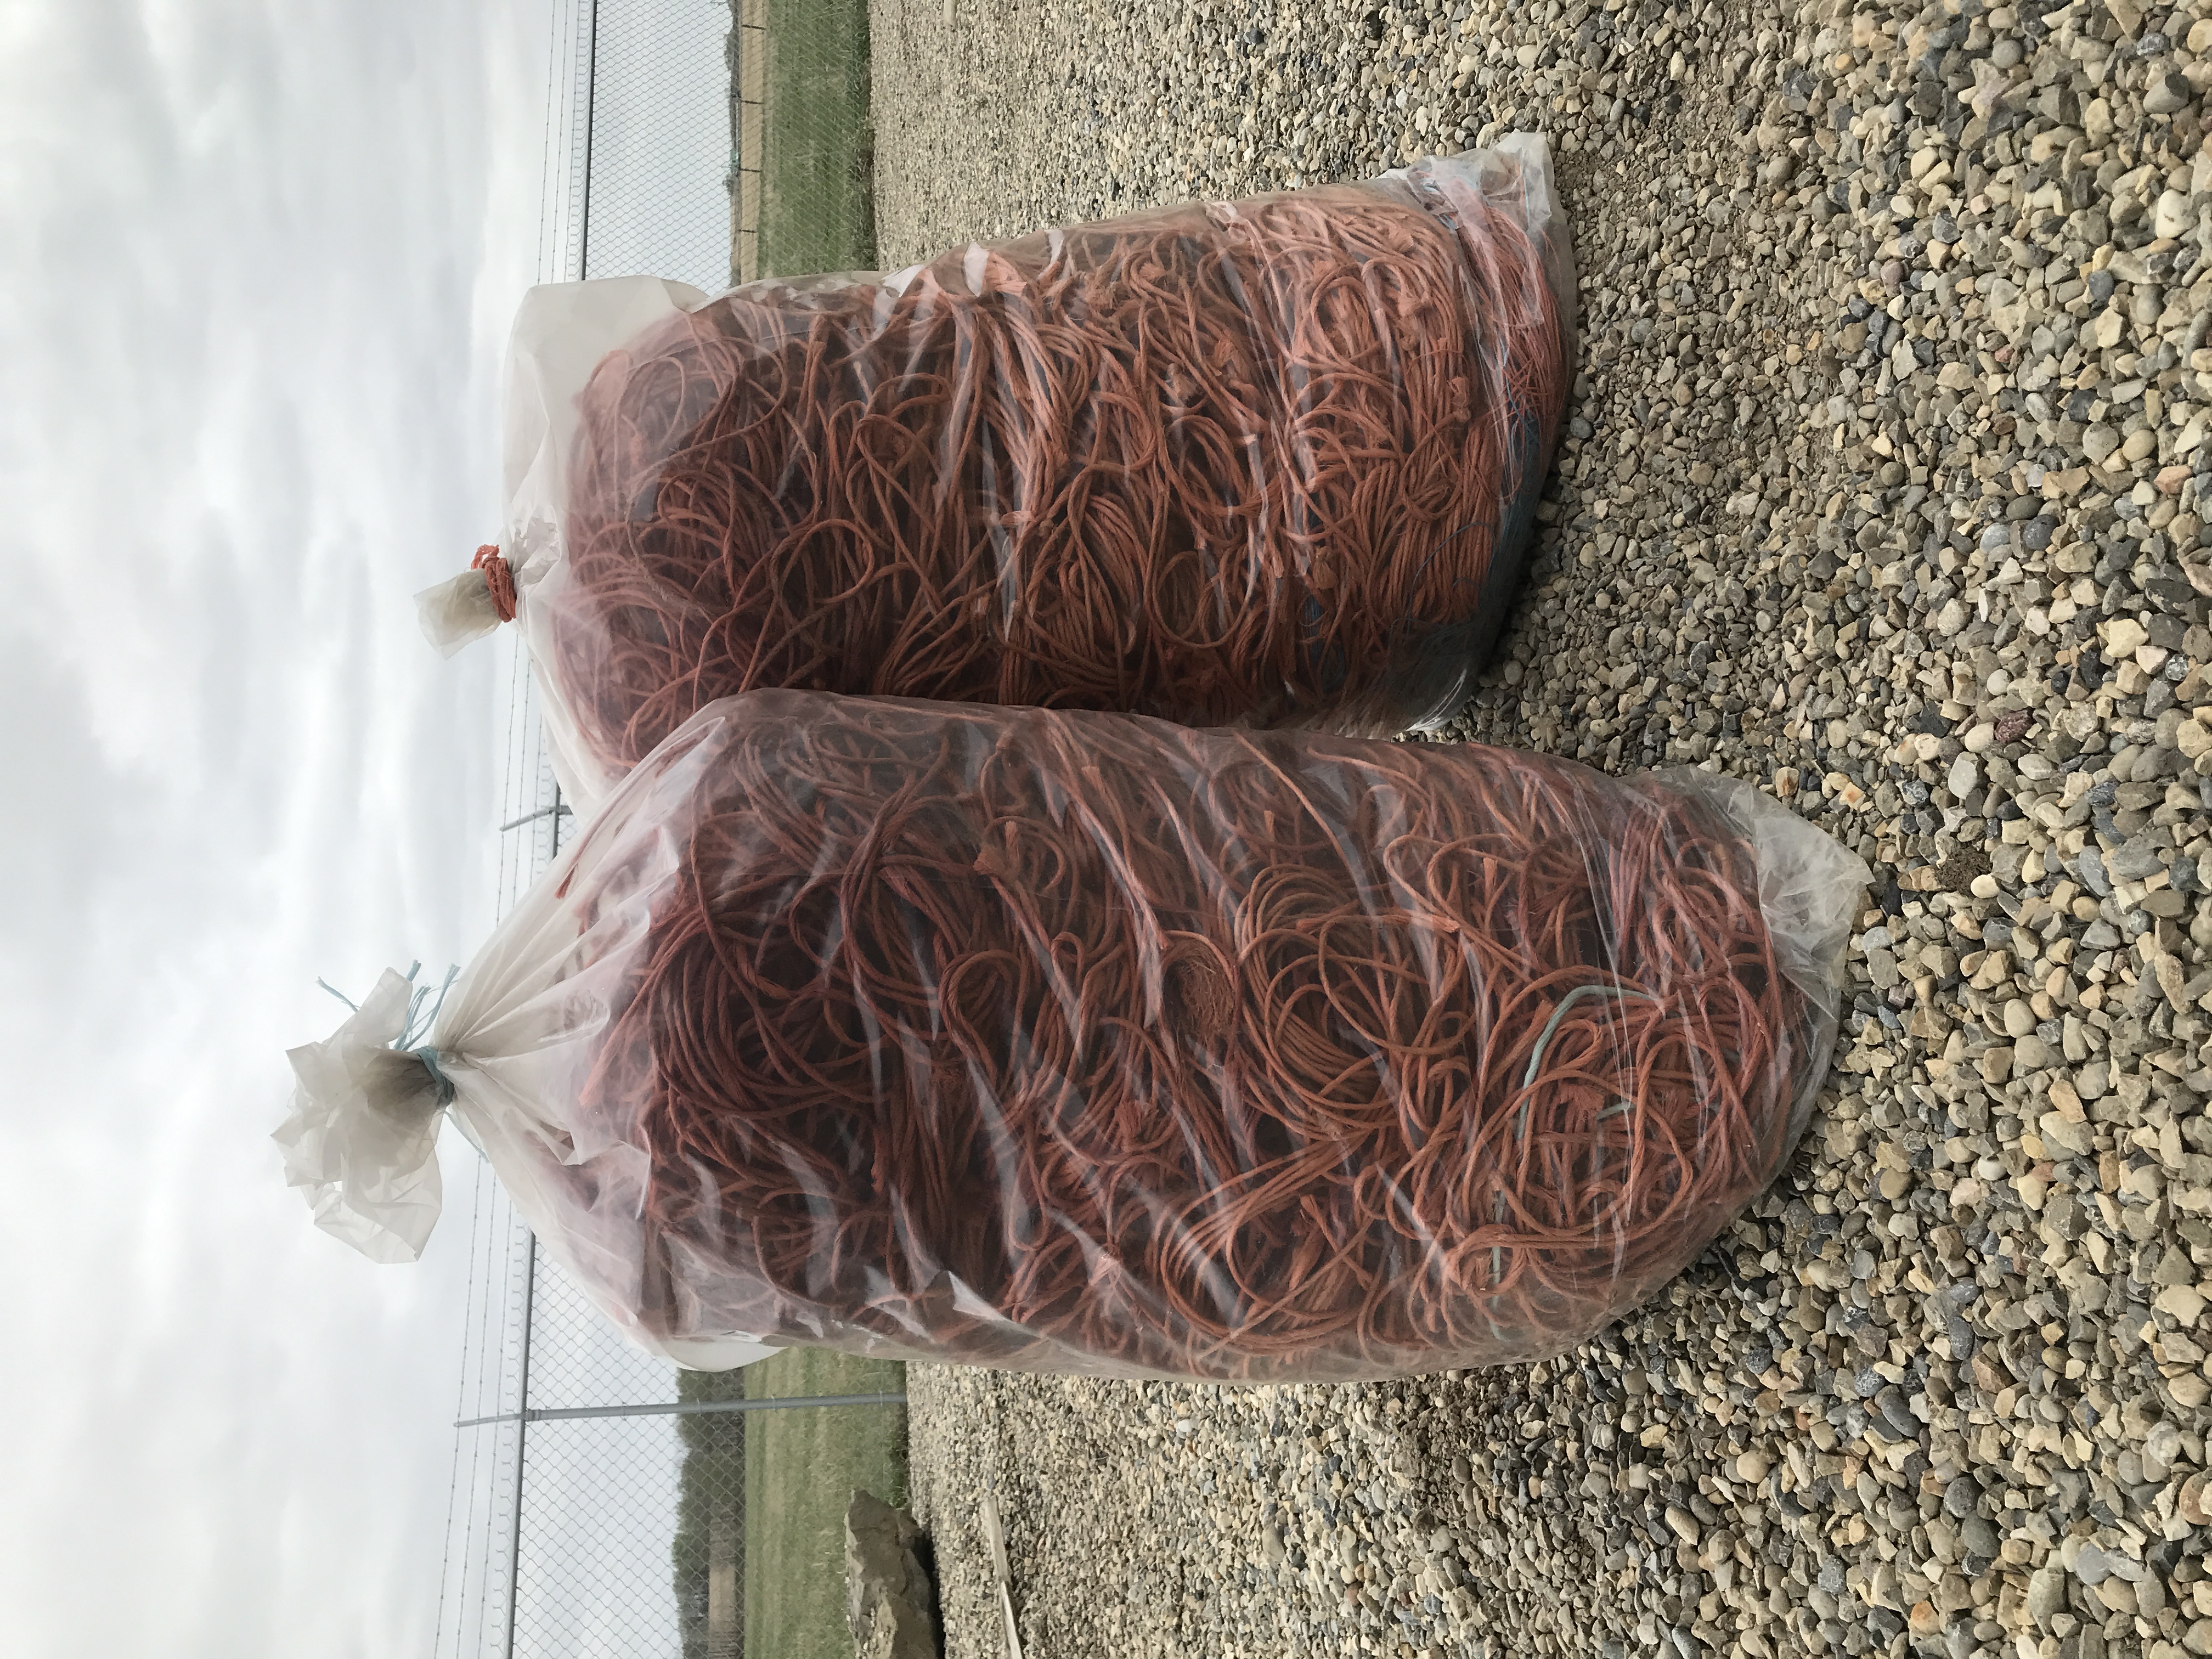 Twine in Cleanfarms ag collection bags ready for recycling